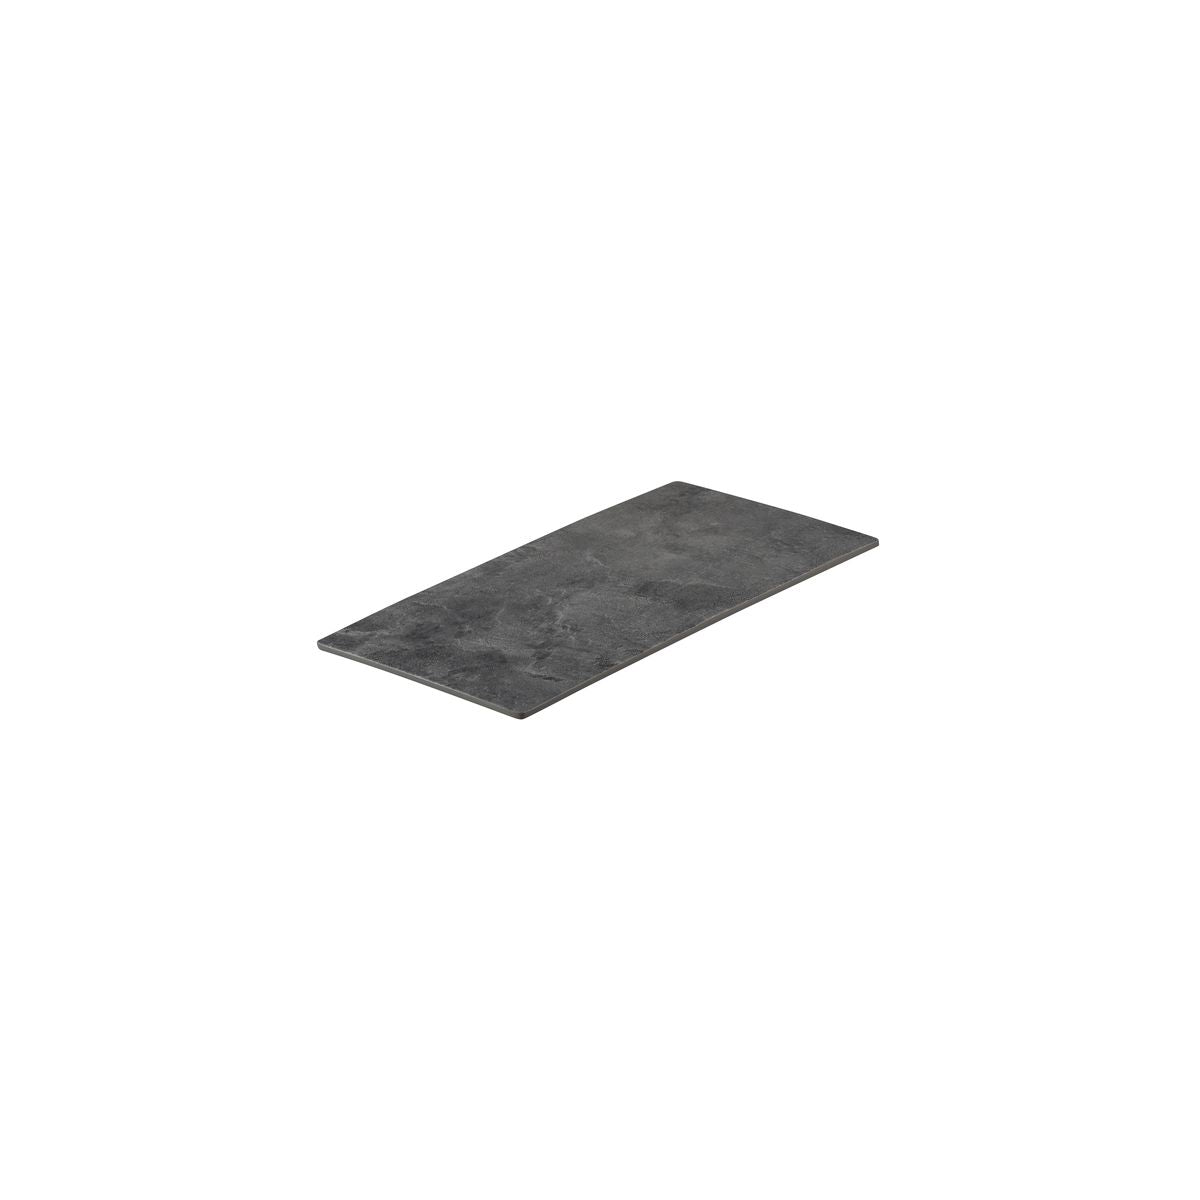 Flat Rectangular Platter, 325 x 175mm, Melamine - Dark Concrete from Ryner Melamine. Sold in boxes of 6. Hospitality quality at wholesale price with The Flying Fork! 